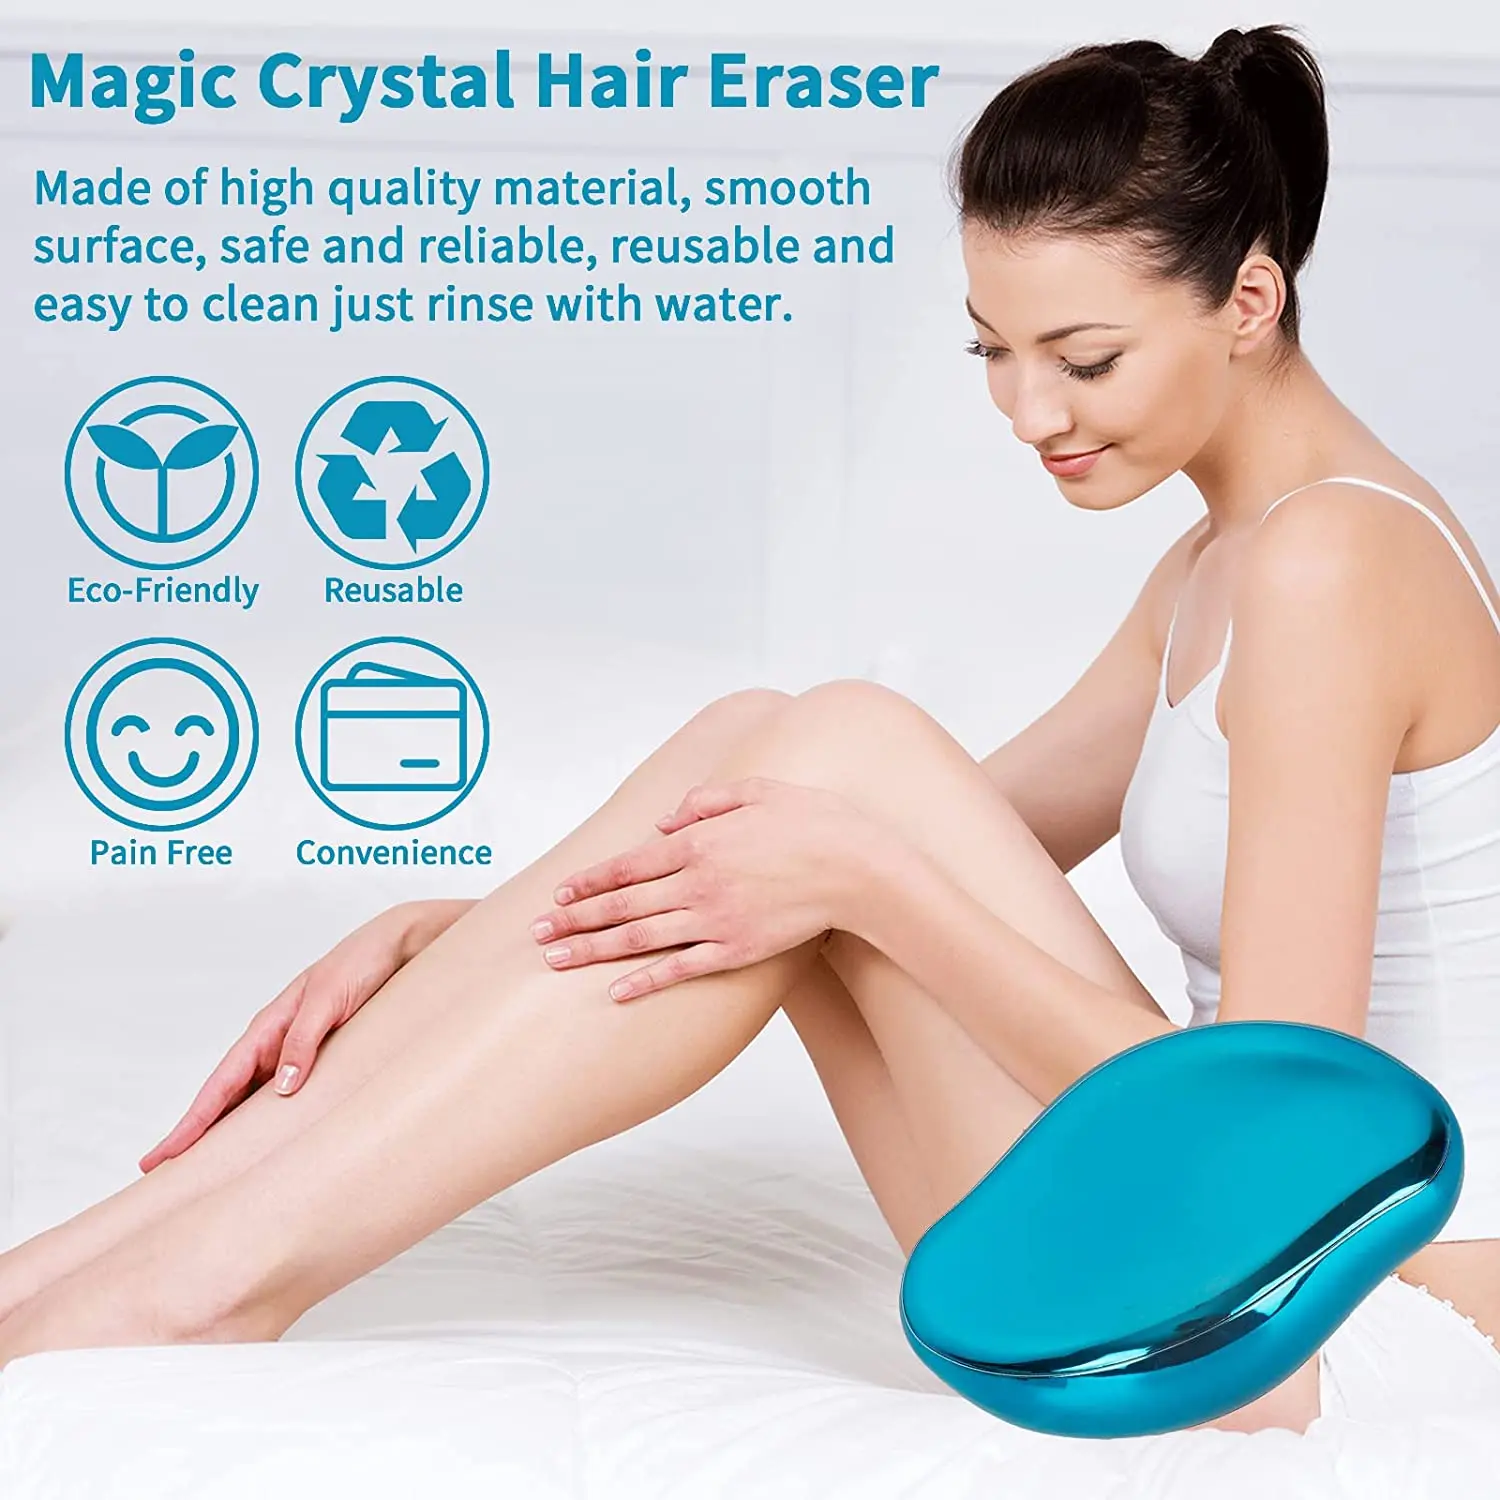 

Painless Magic Crystal Hair Remover for Women Men, Silky Hair Removal Eraser Exfoliator Tool for Arms Legs Back Body Any Part